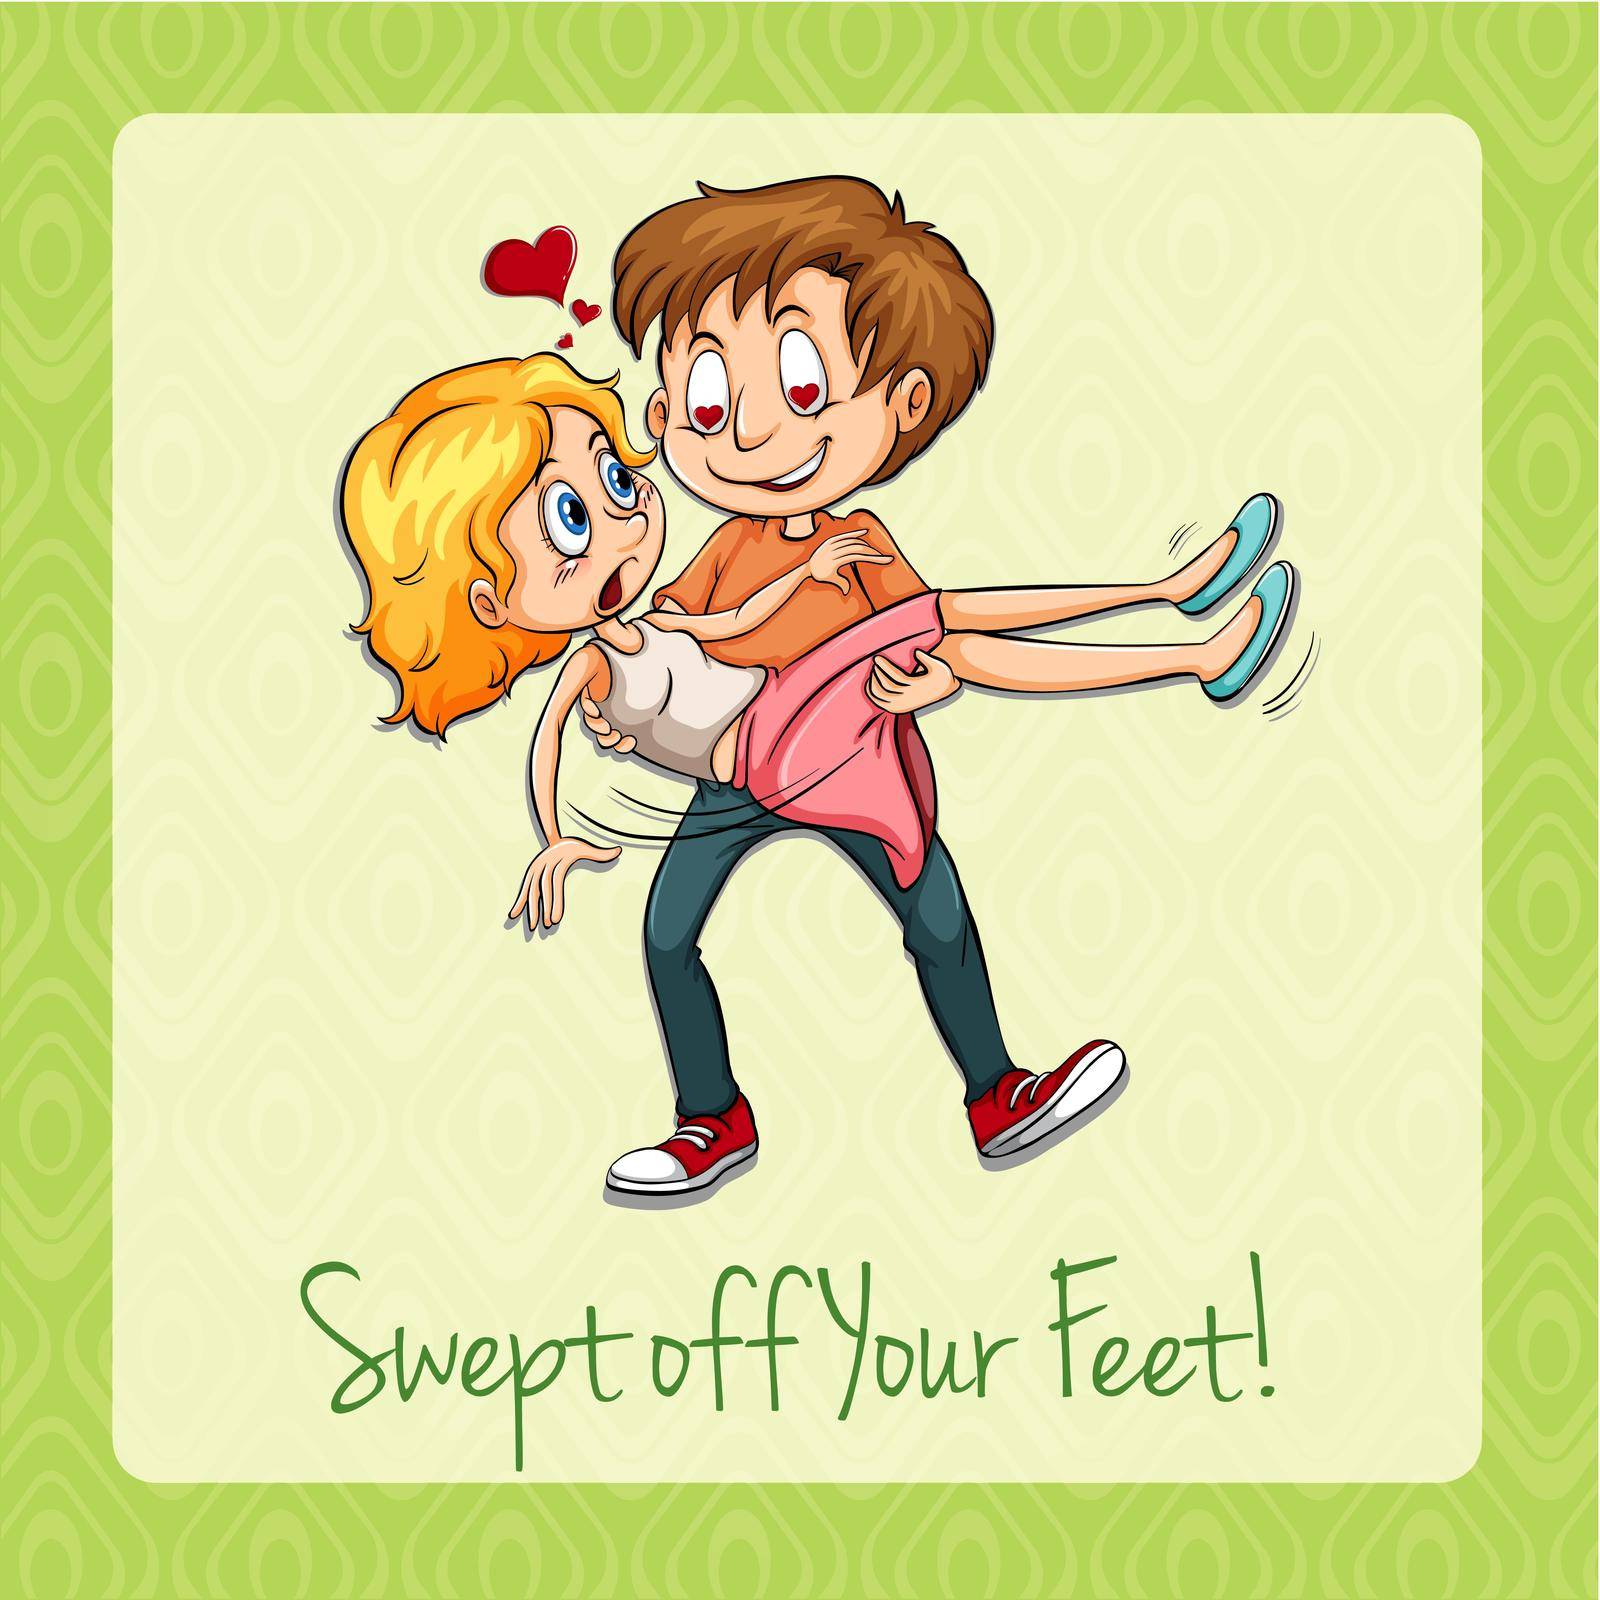 Idiom swept off your feet by iimages